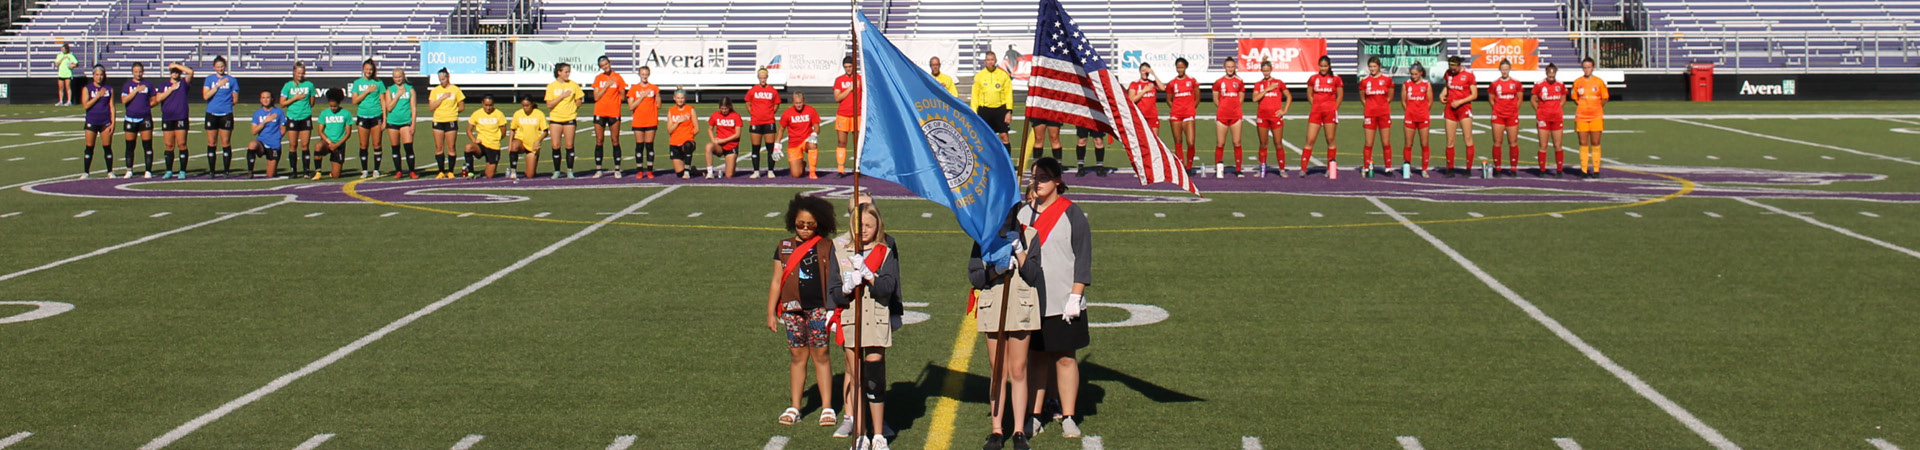  girl scouts present the colors at a soccer game 